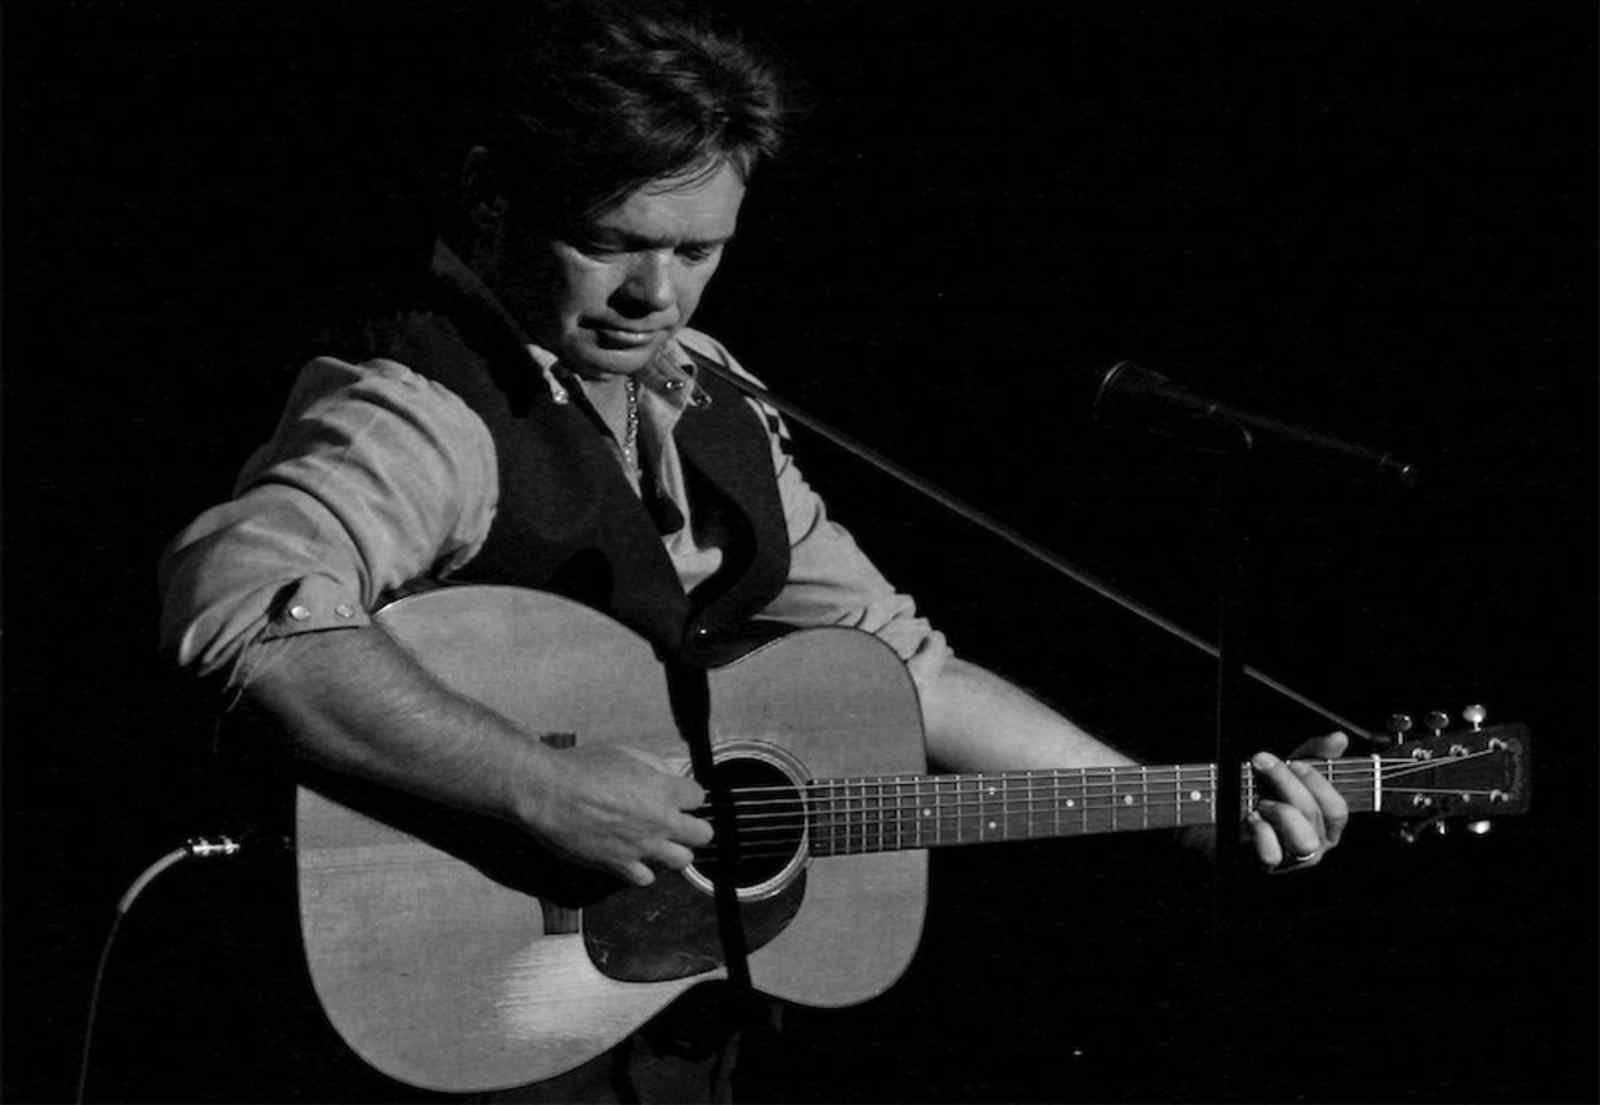 John Mellencamp Partners With Turner Classic Movies As Guest Programmer